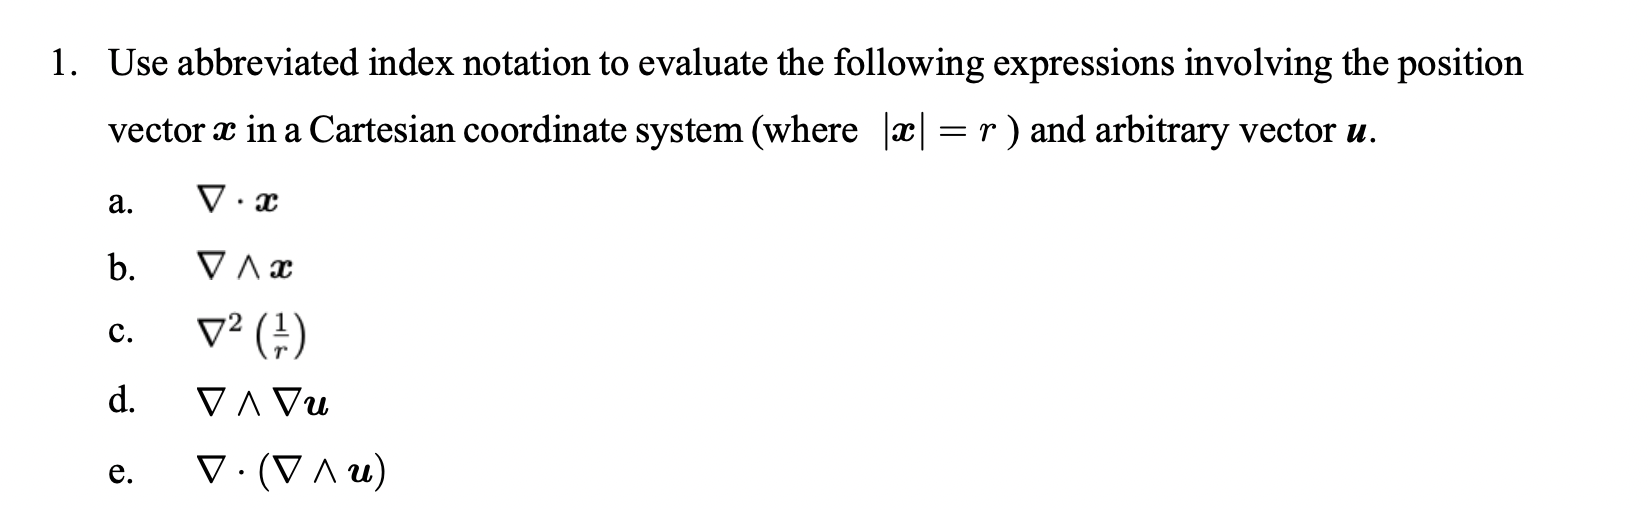 1. Use abbreviated index notation to evaluate the following expressions involving the position vector \( \boldsymbol{x} \) in